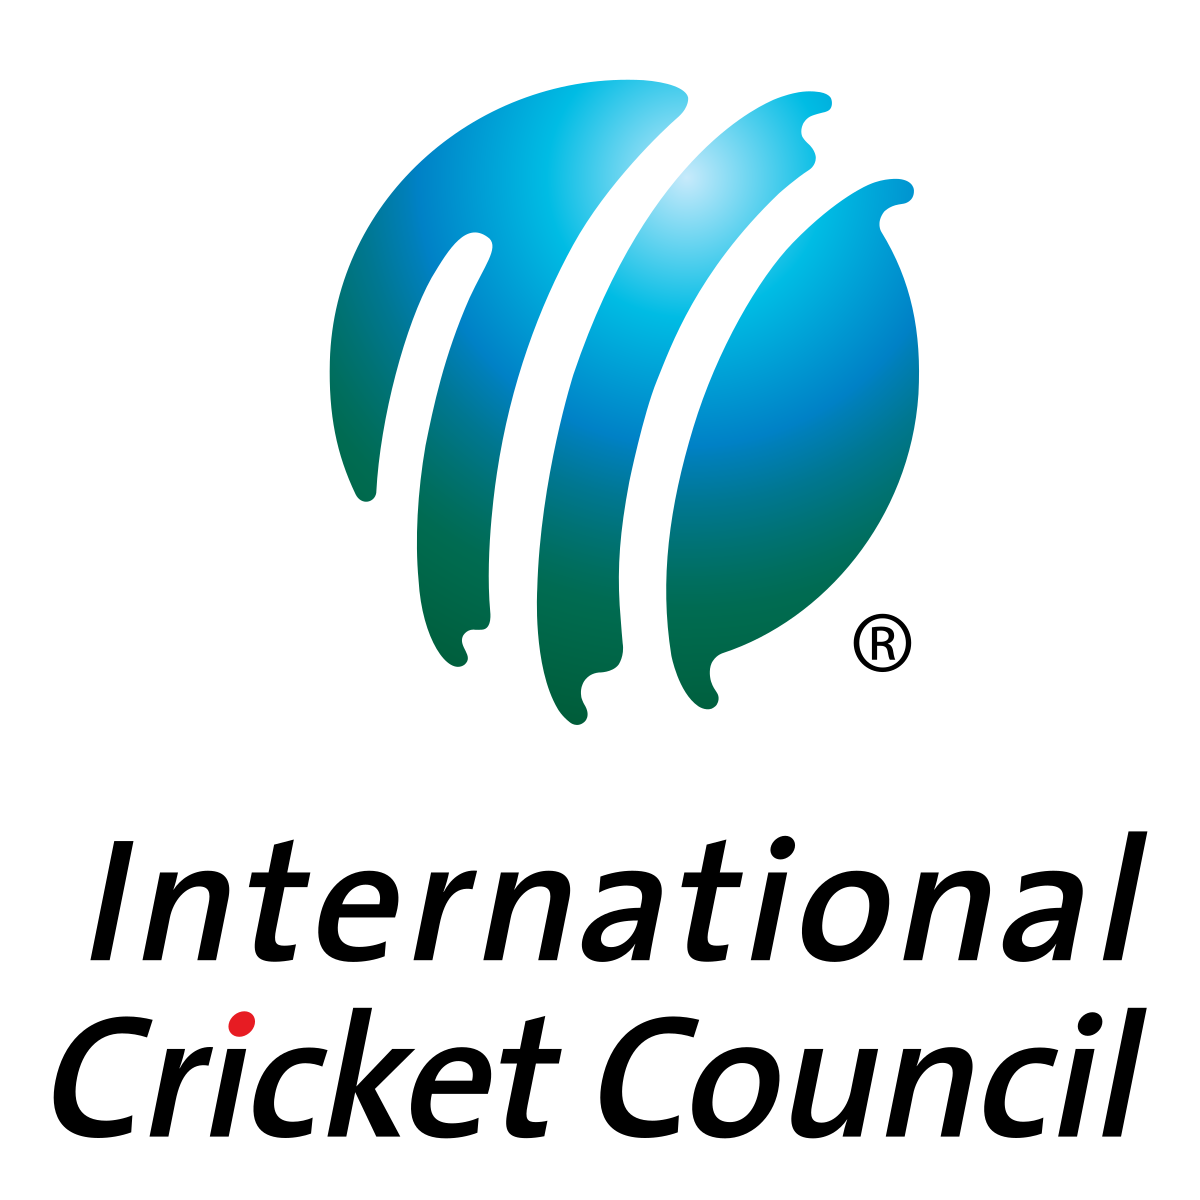 ICC announces all-female panel of match officials for Women's T20 World Cup